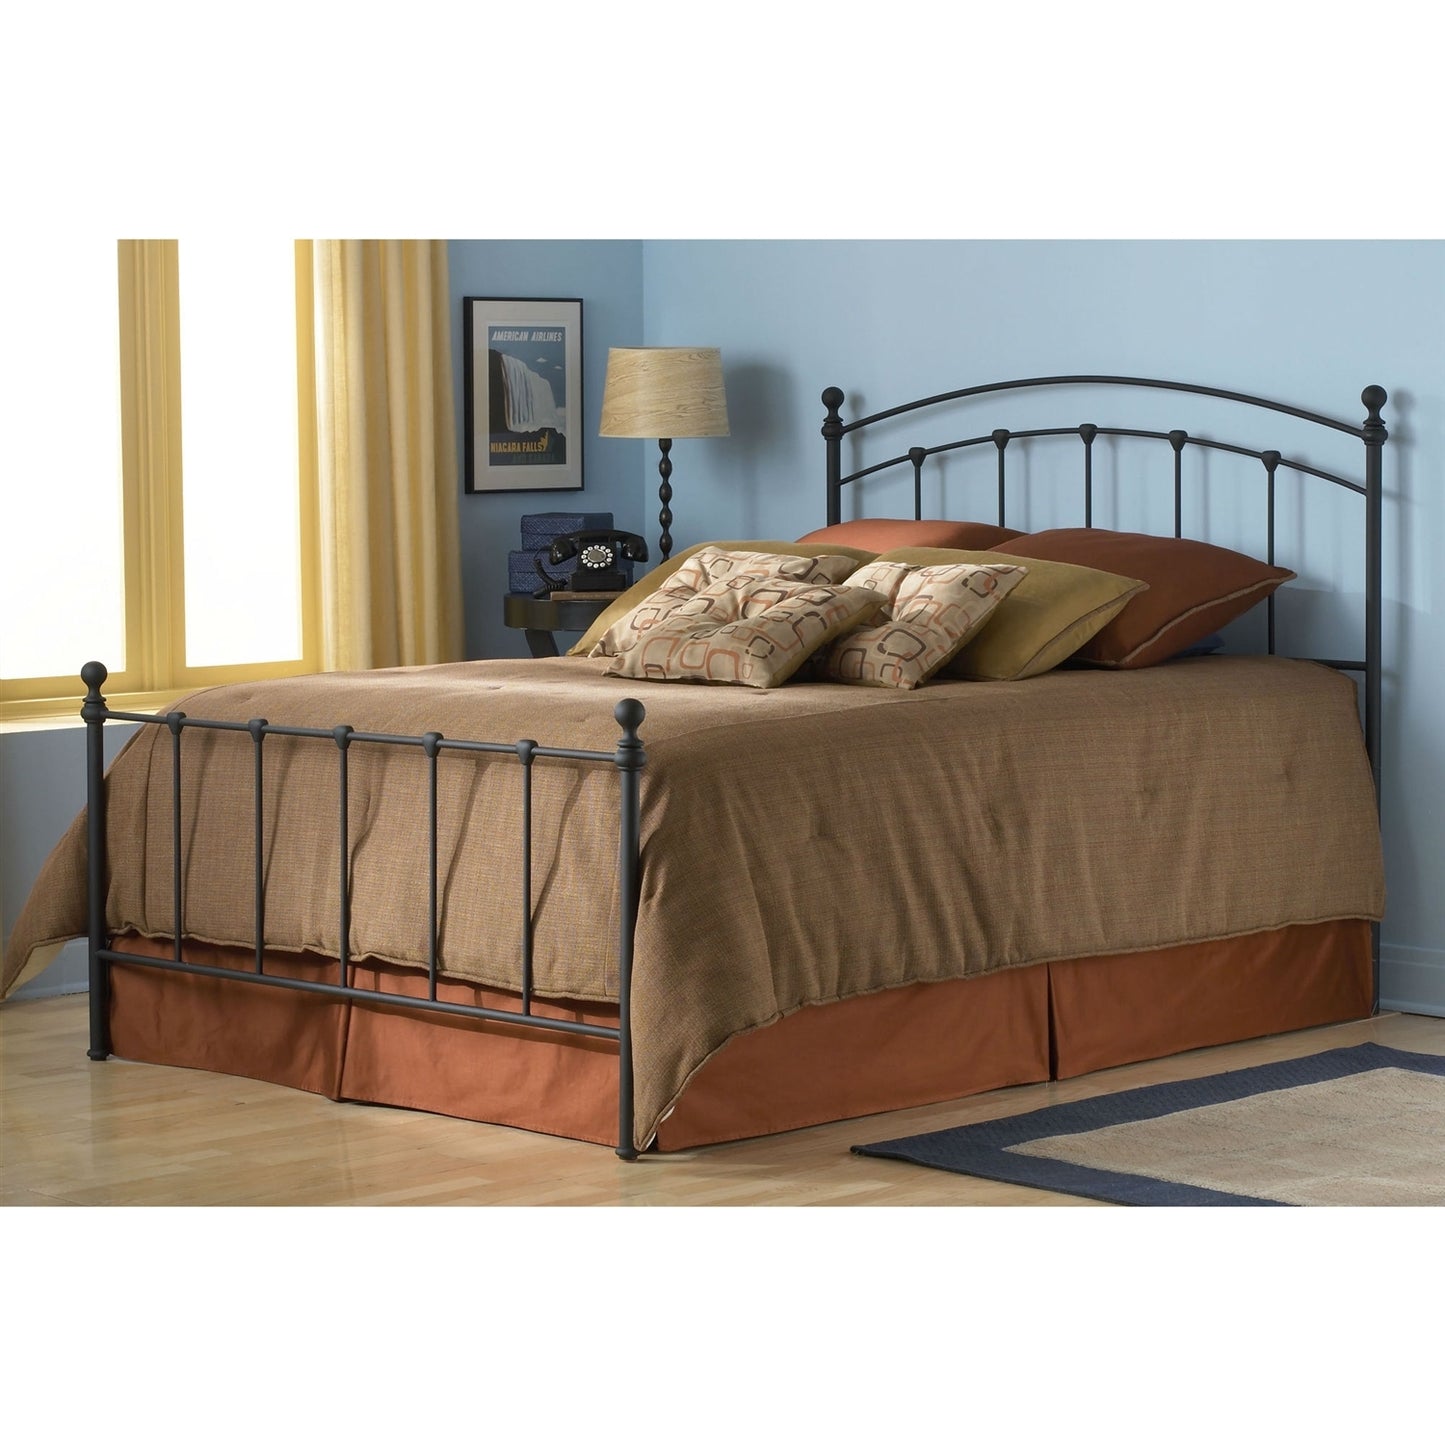 King size Matte Black Metal Bed with Headboard and Footboard